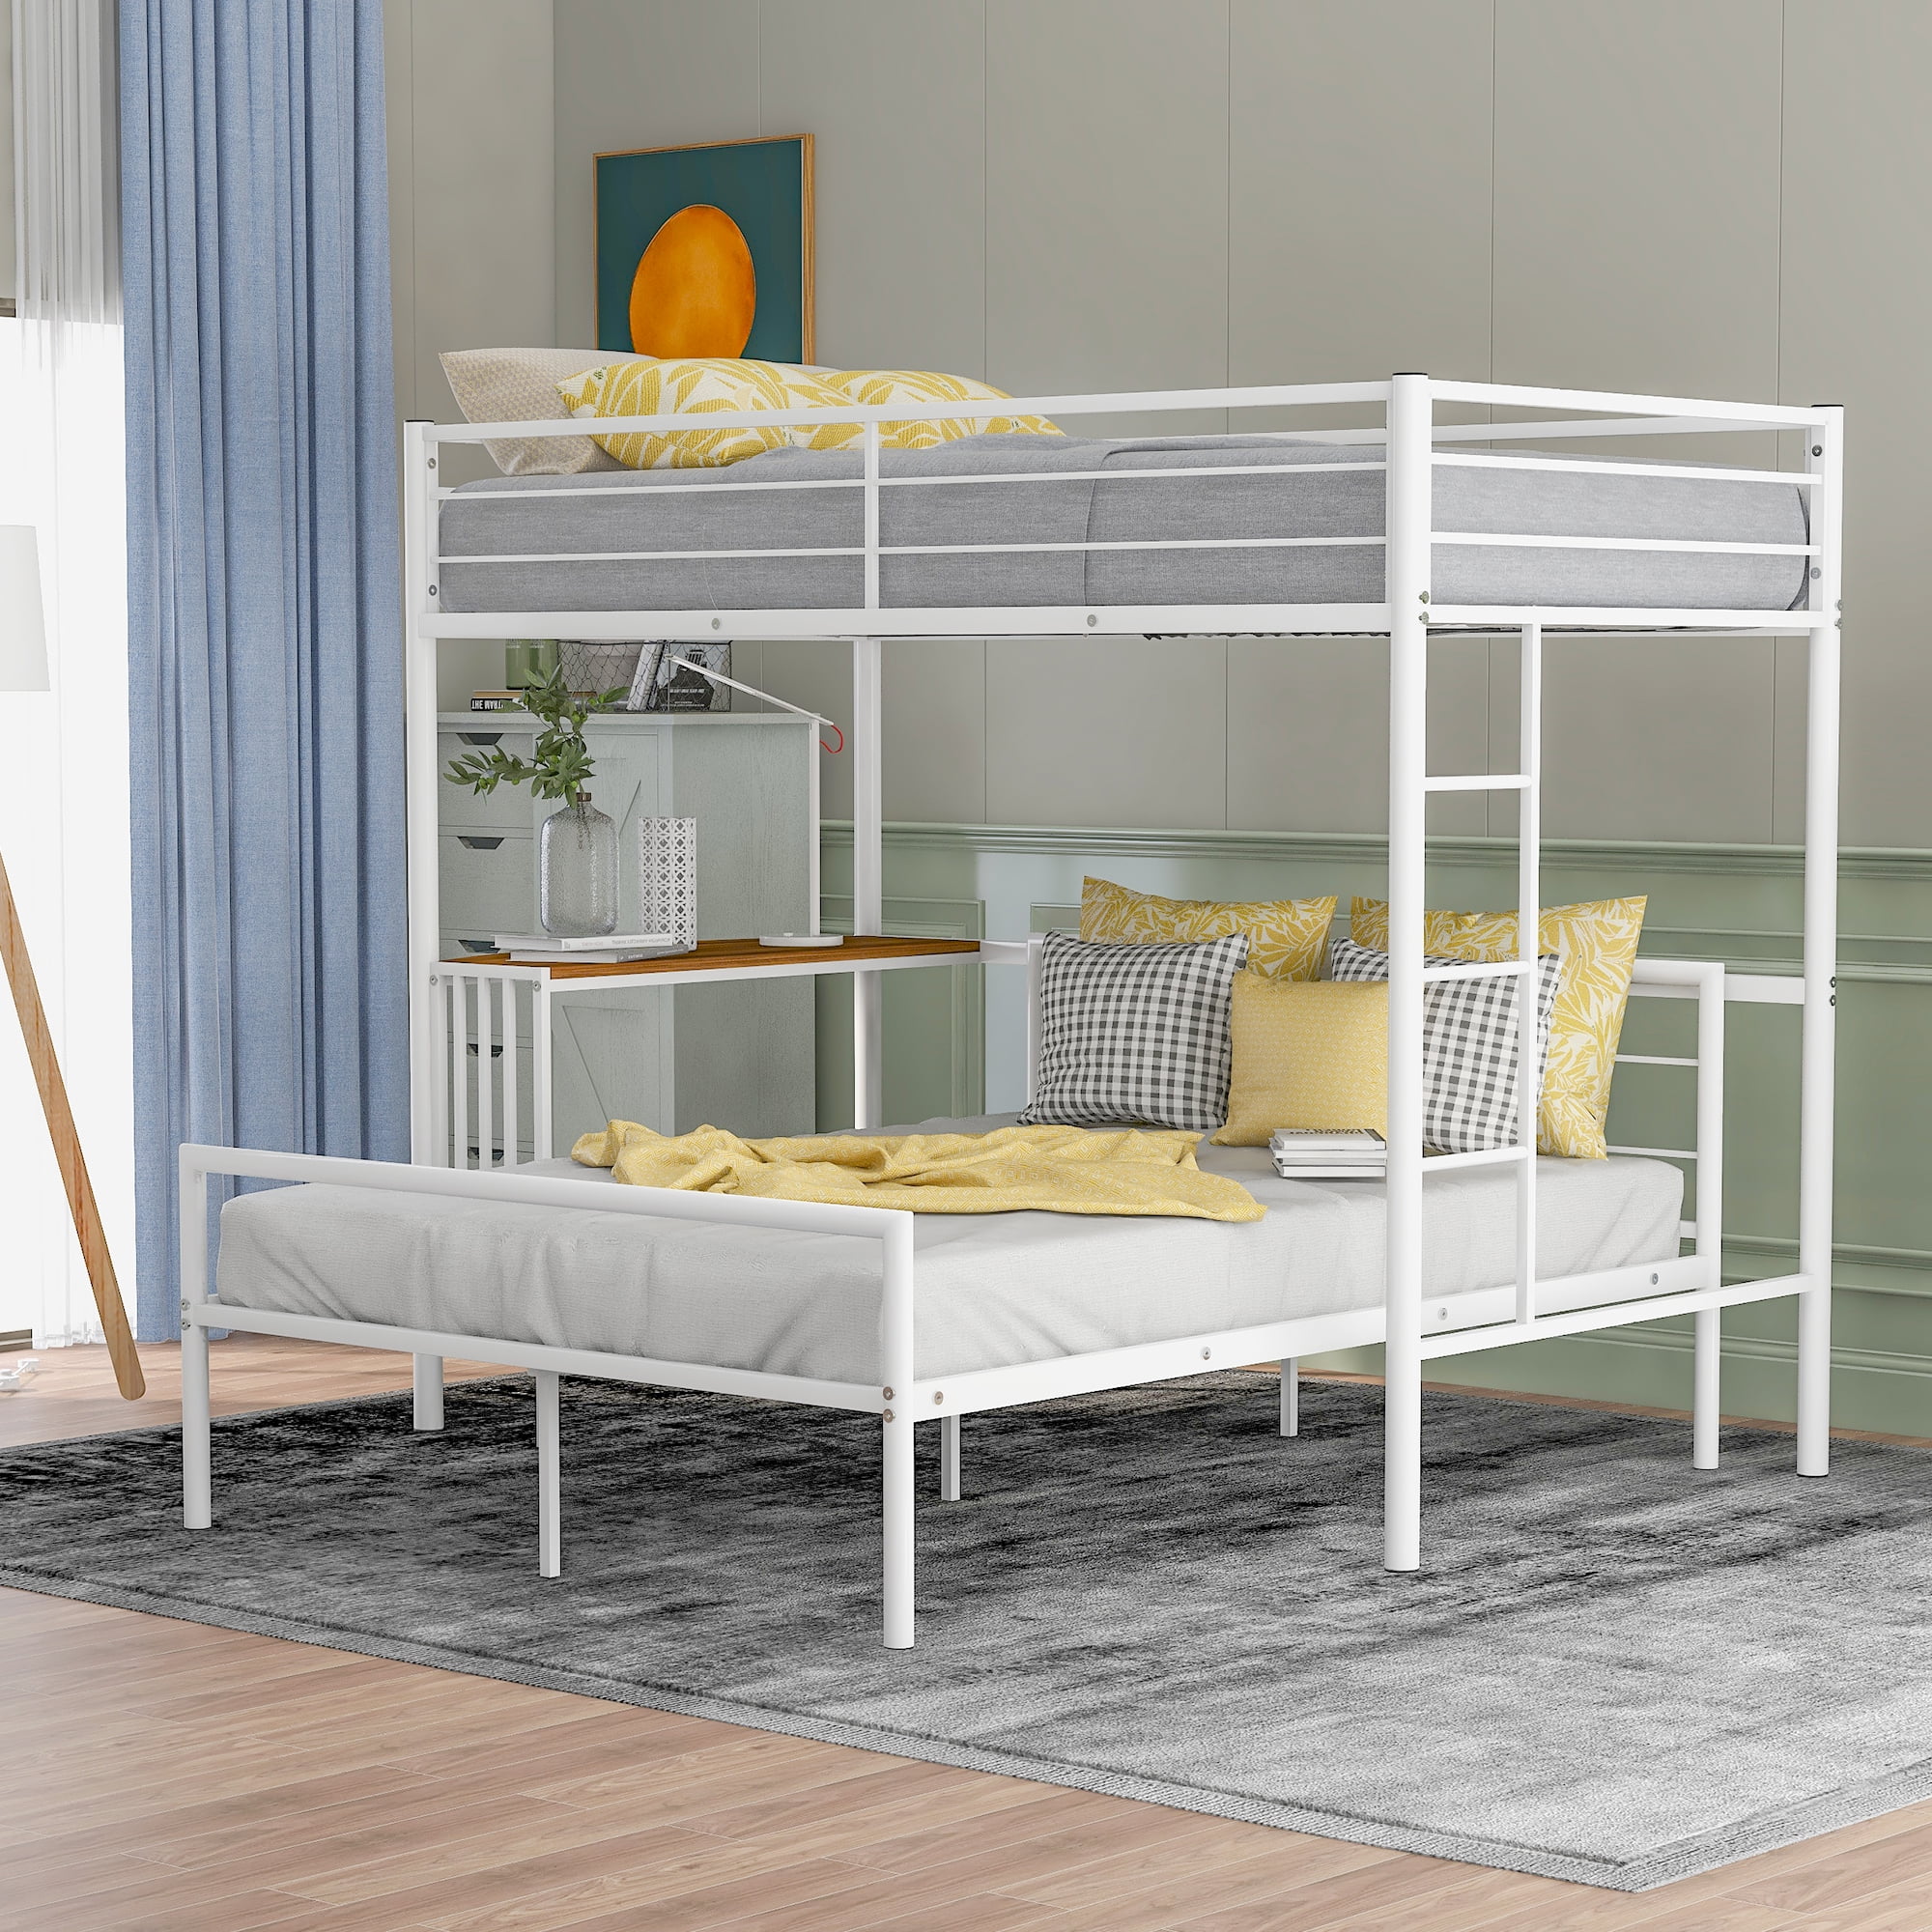 Twin Over Full Bunk Bed With Desk For, Detachable Twin Bunk Beds